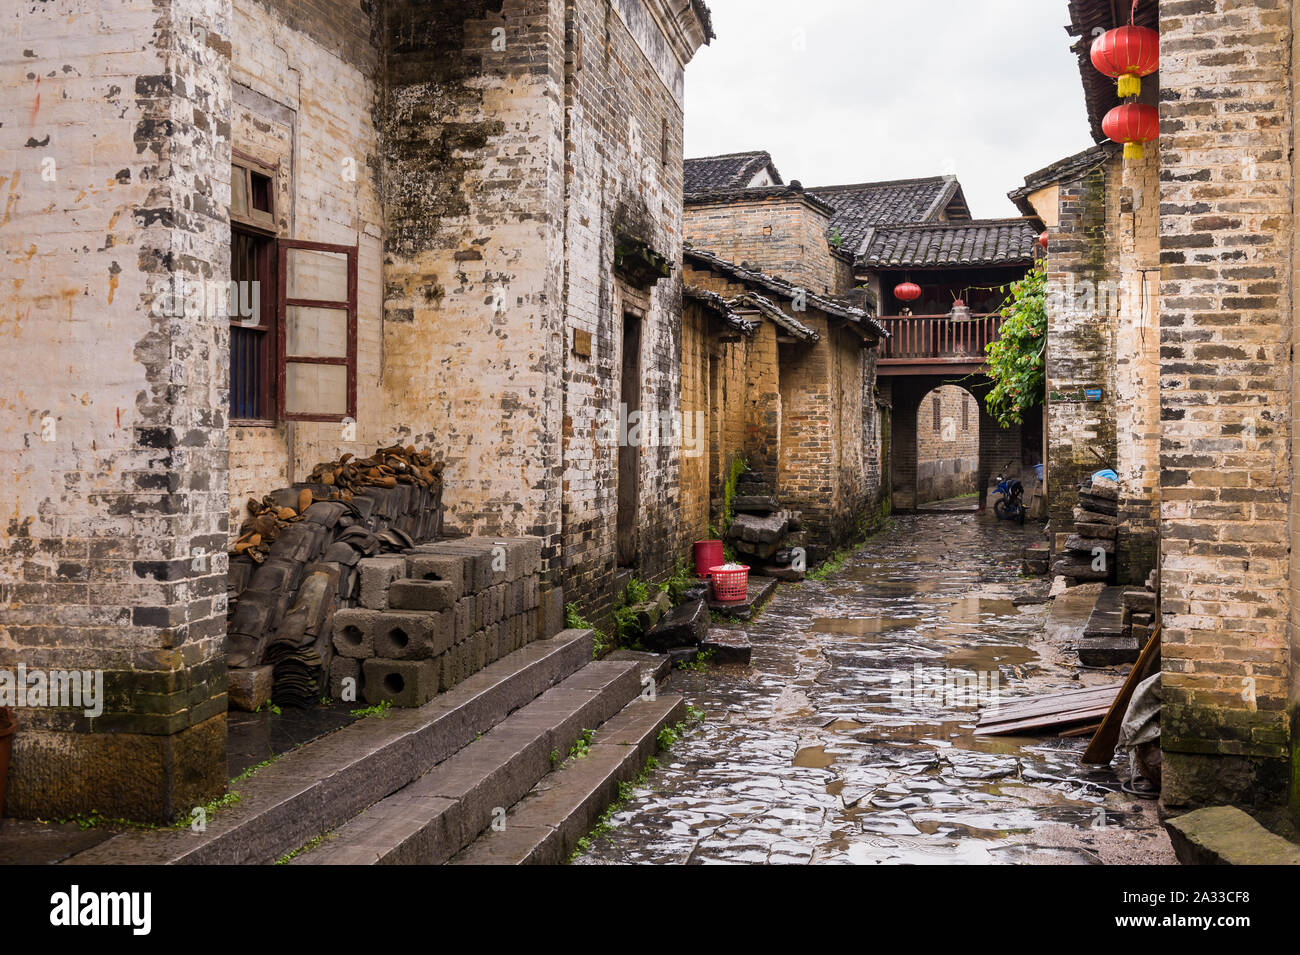 Guilin, China, 20 Jun 2014: Huang Yao ancient town with historical streets and alleys. One of China's most popular old towns. Stock Photo